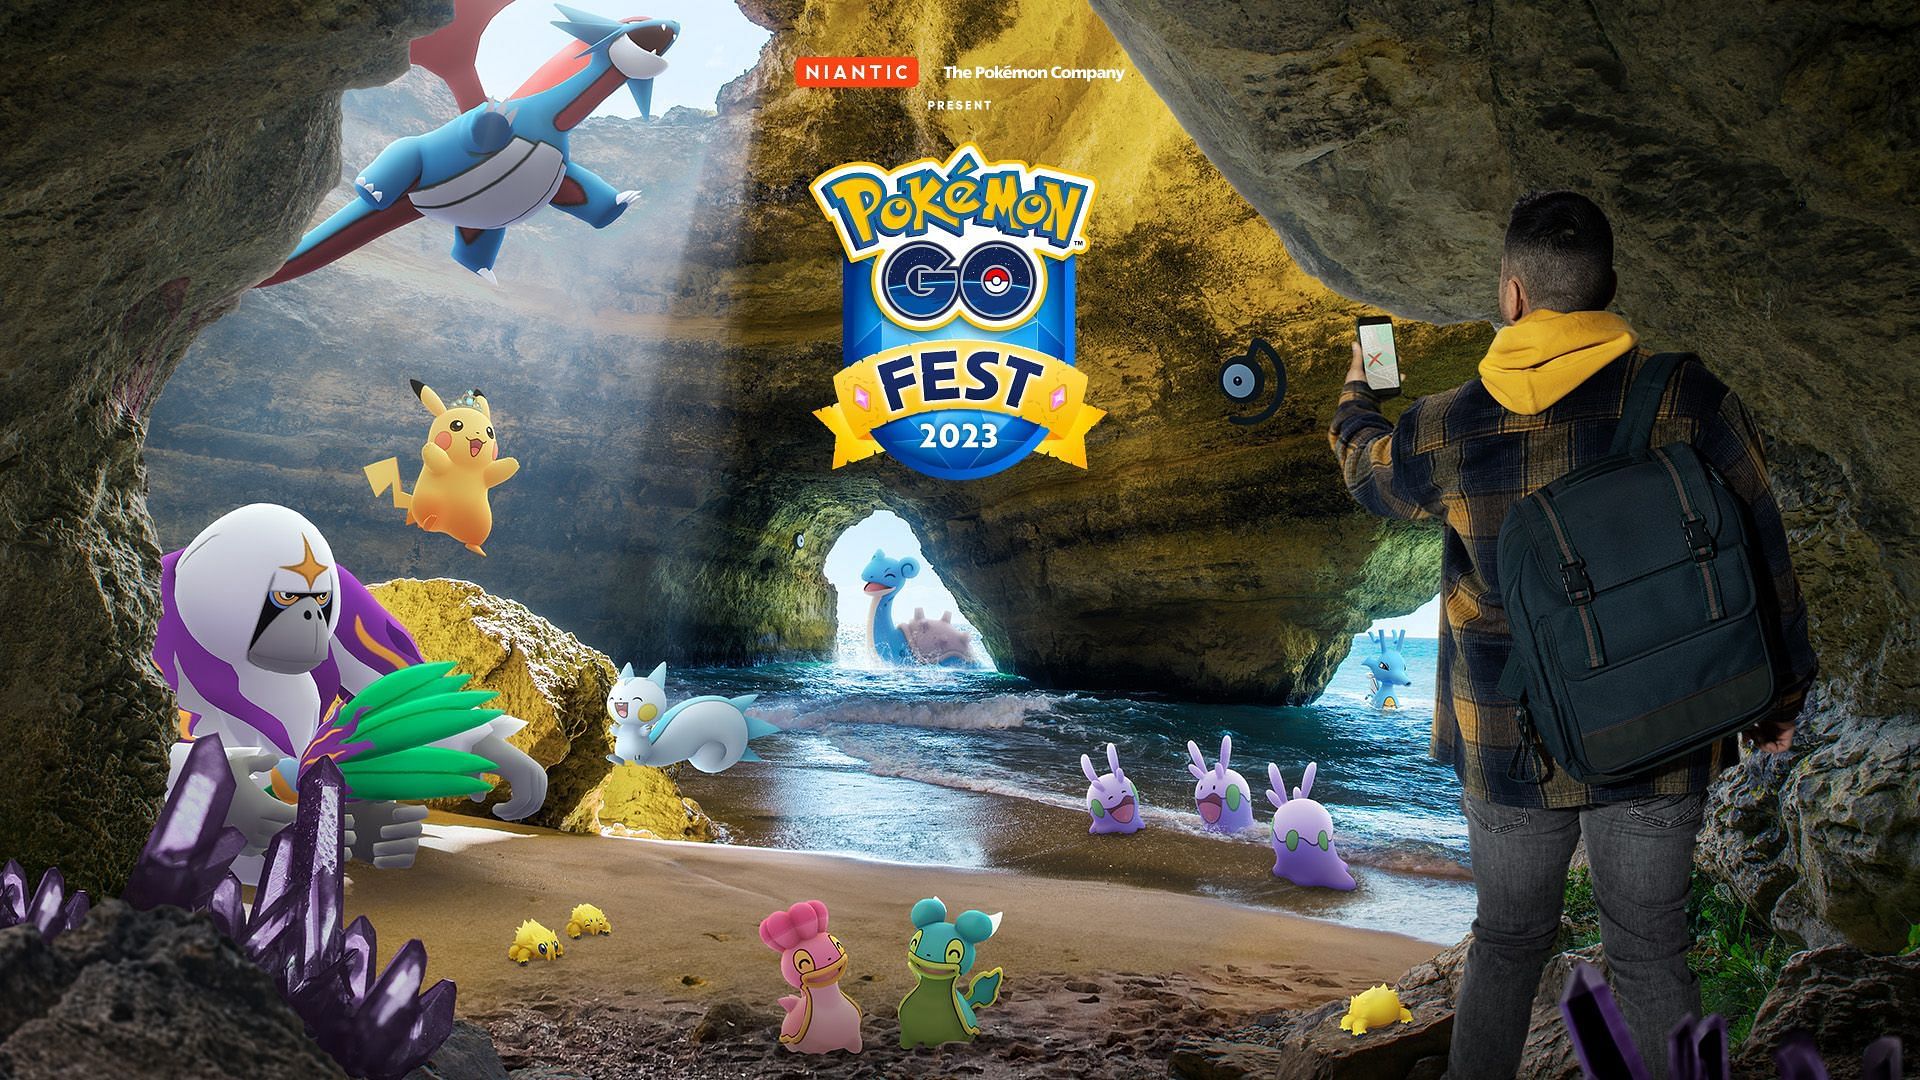 Free vs Ticket Exploring all Pokemon GO Fest 2023 Global features